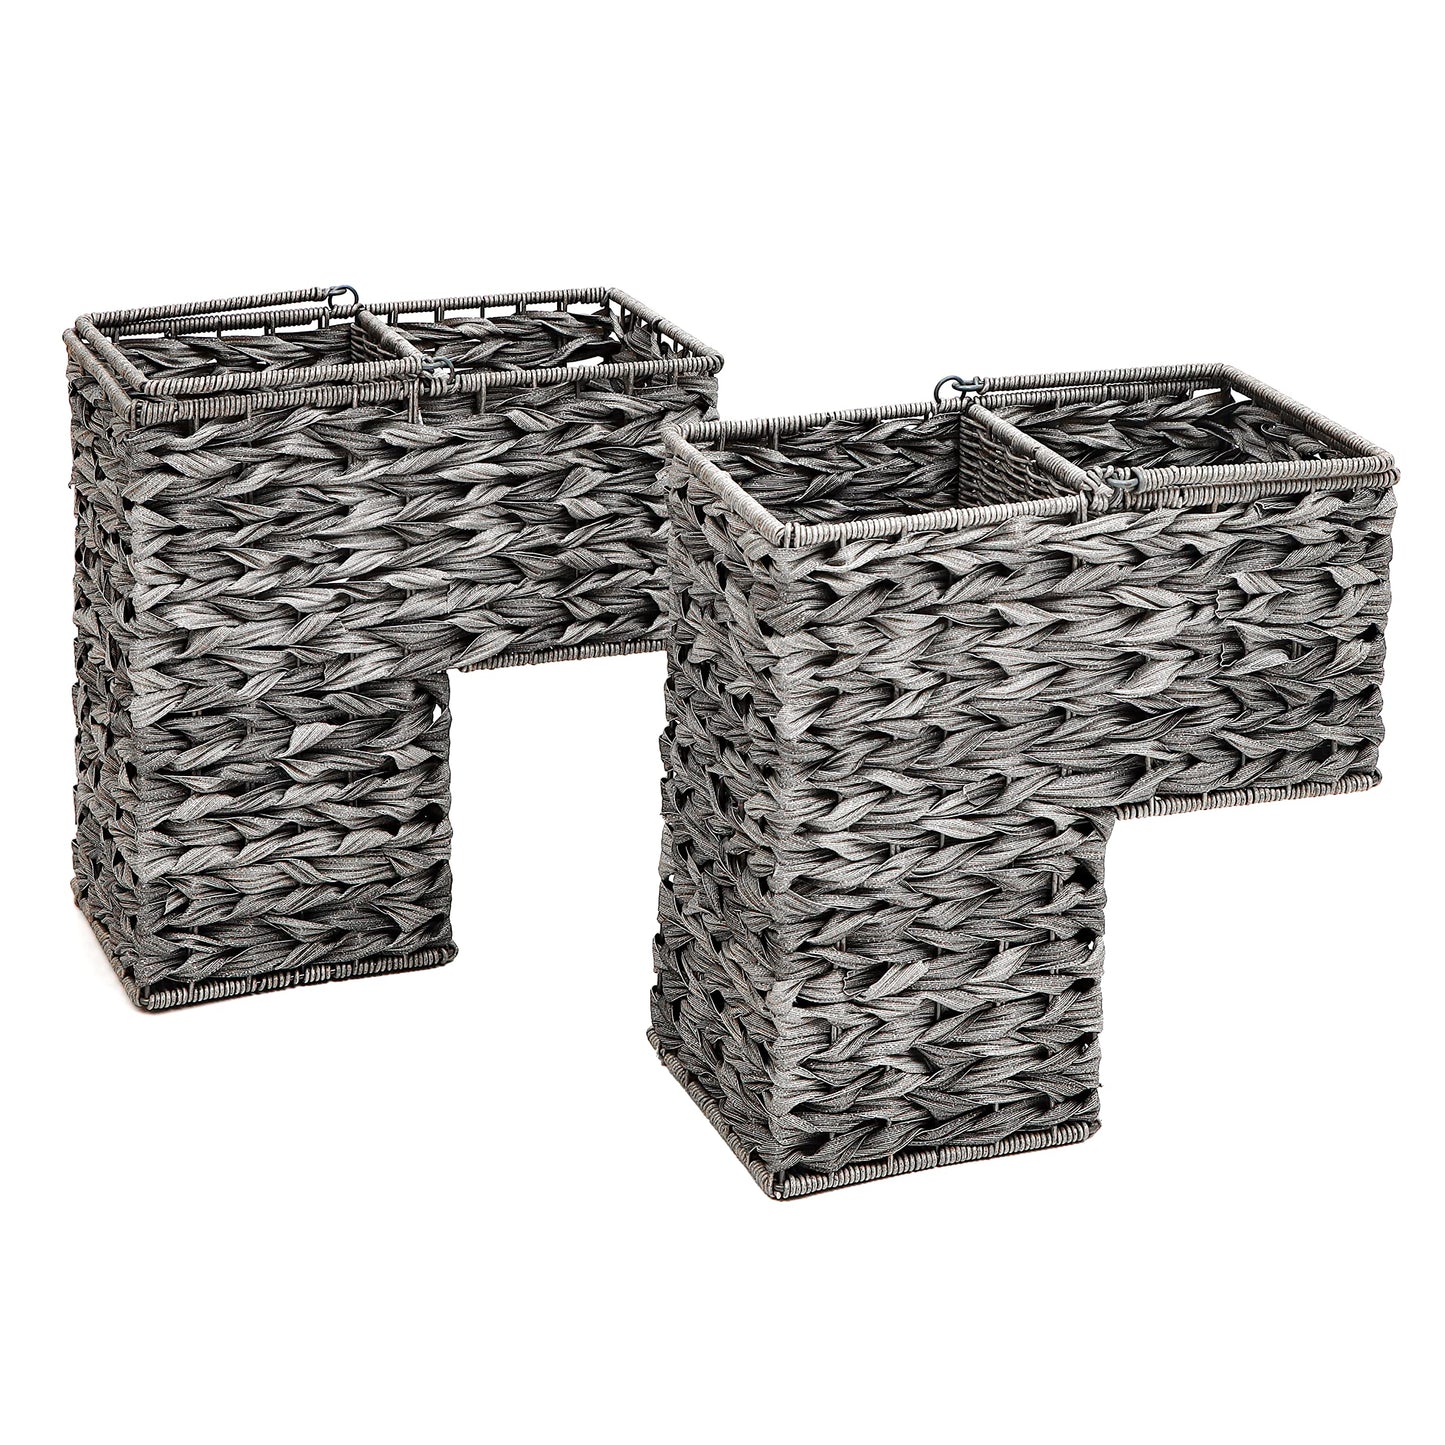 14.5" Plastic Wicker Storage Stair Basket Set With Handles by Trademark Innovations (Set of 2, Grey)